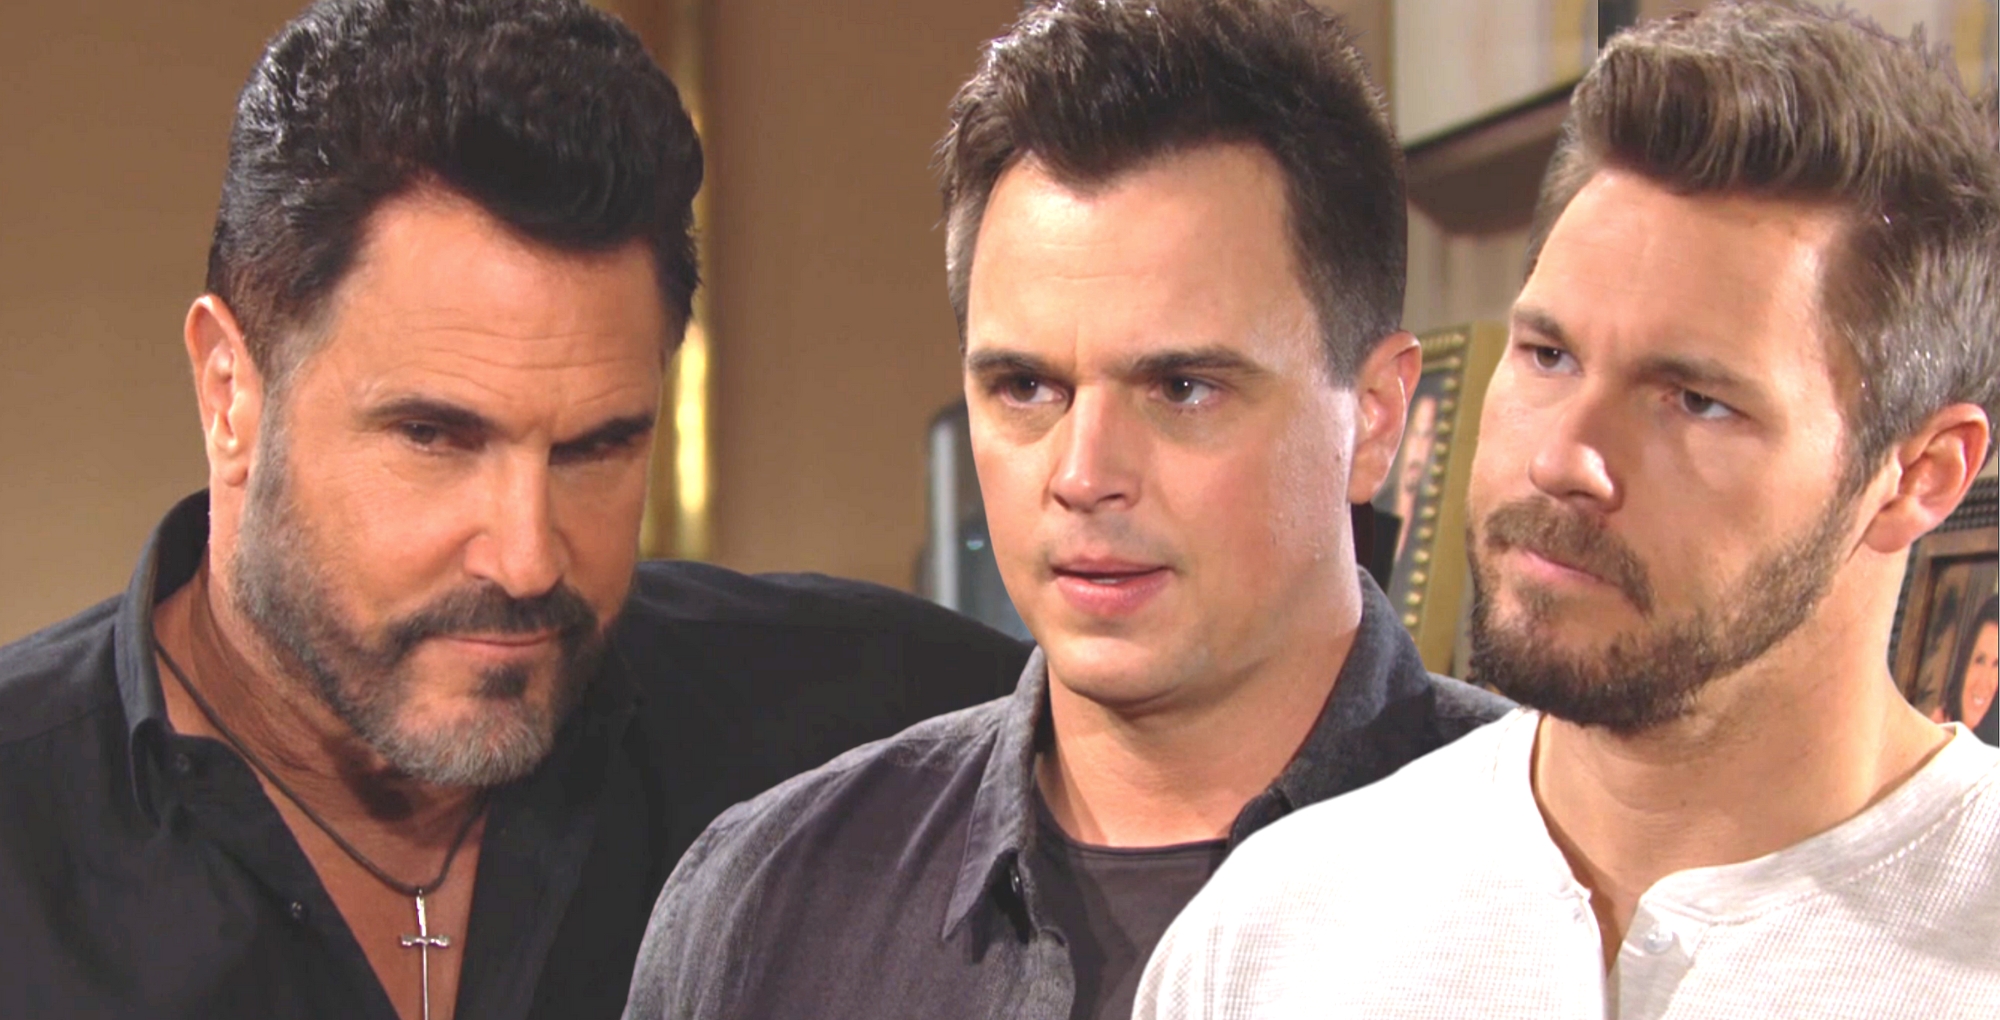 Will Bill Spencer Get Forgiveness From His B&B Family For What He’s Done?